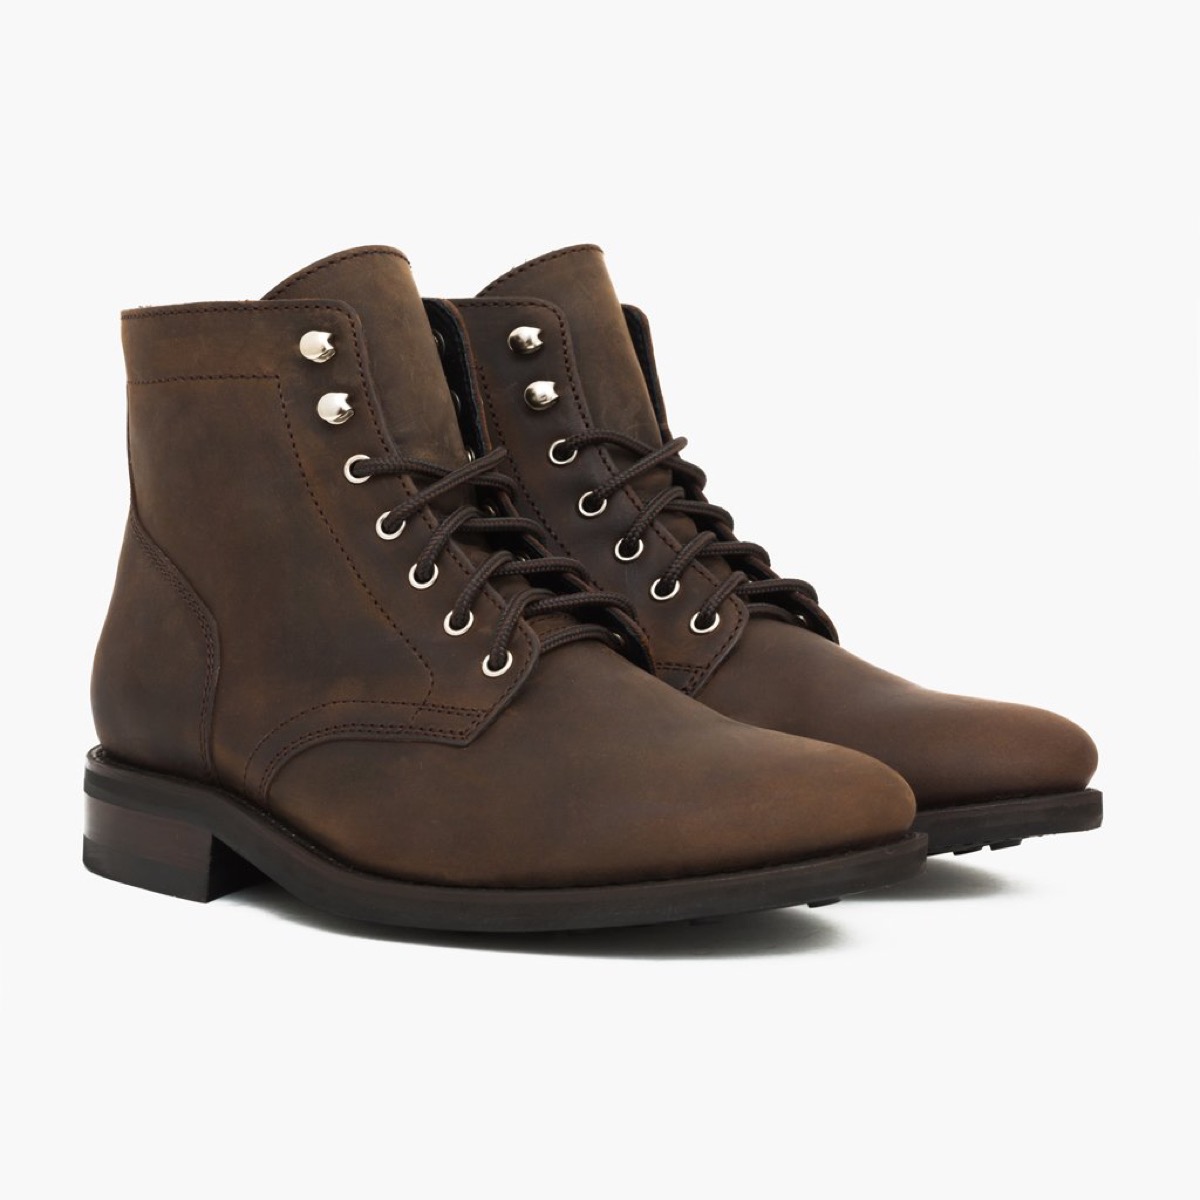 Men's leather pair of boots